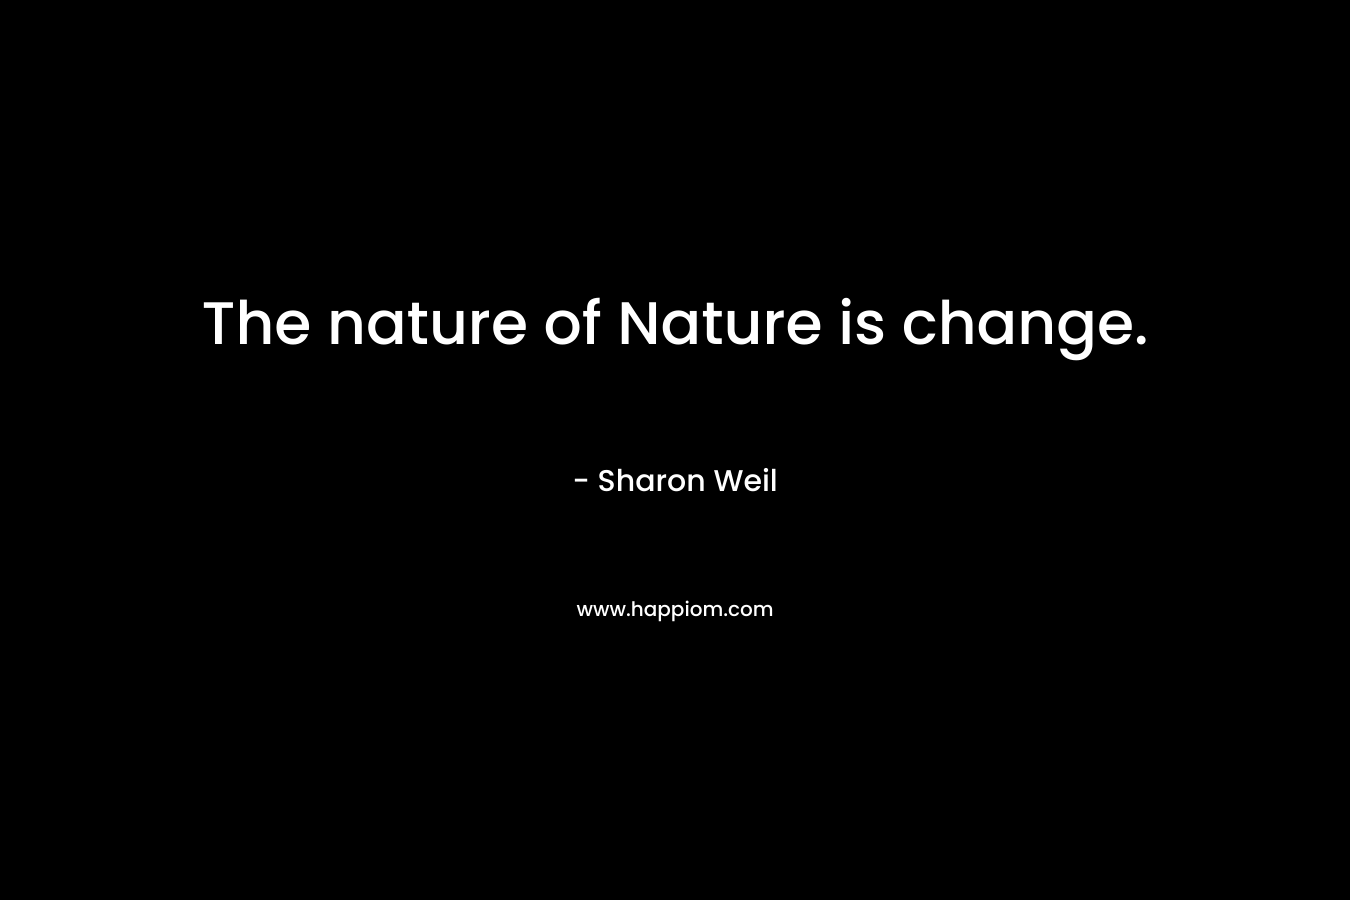 The nature of Nature is change.